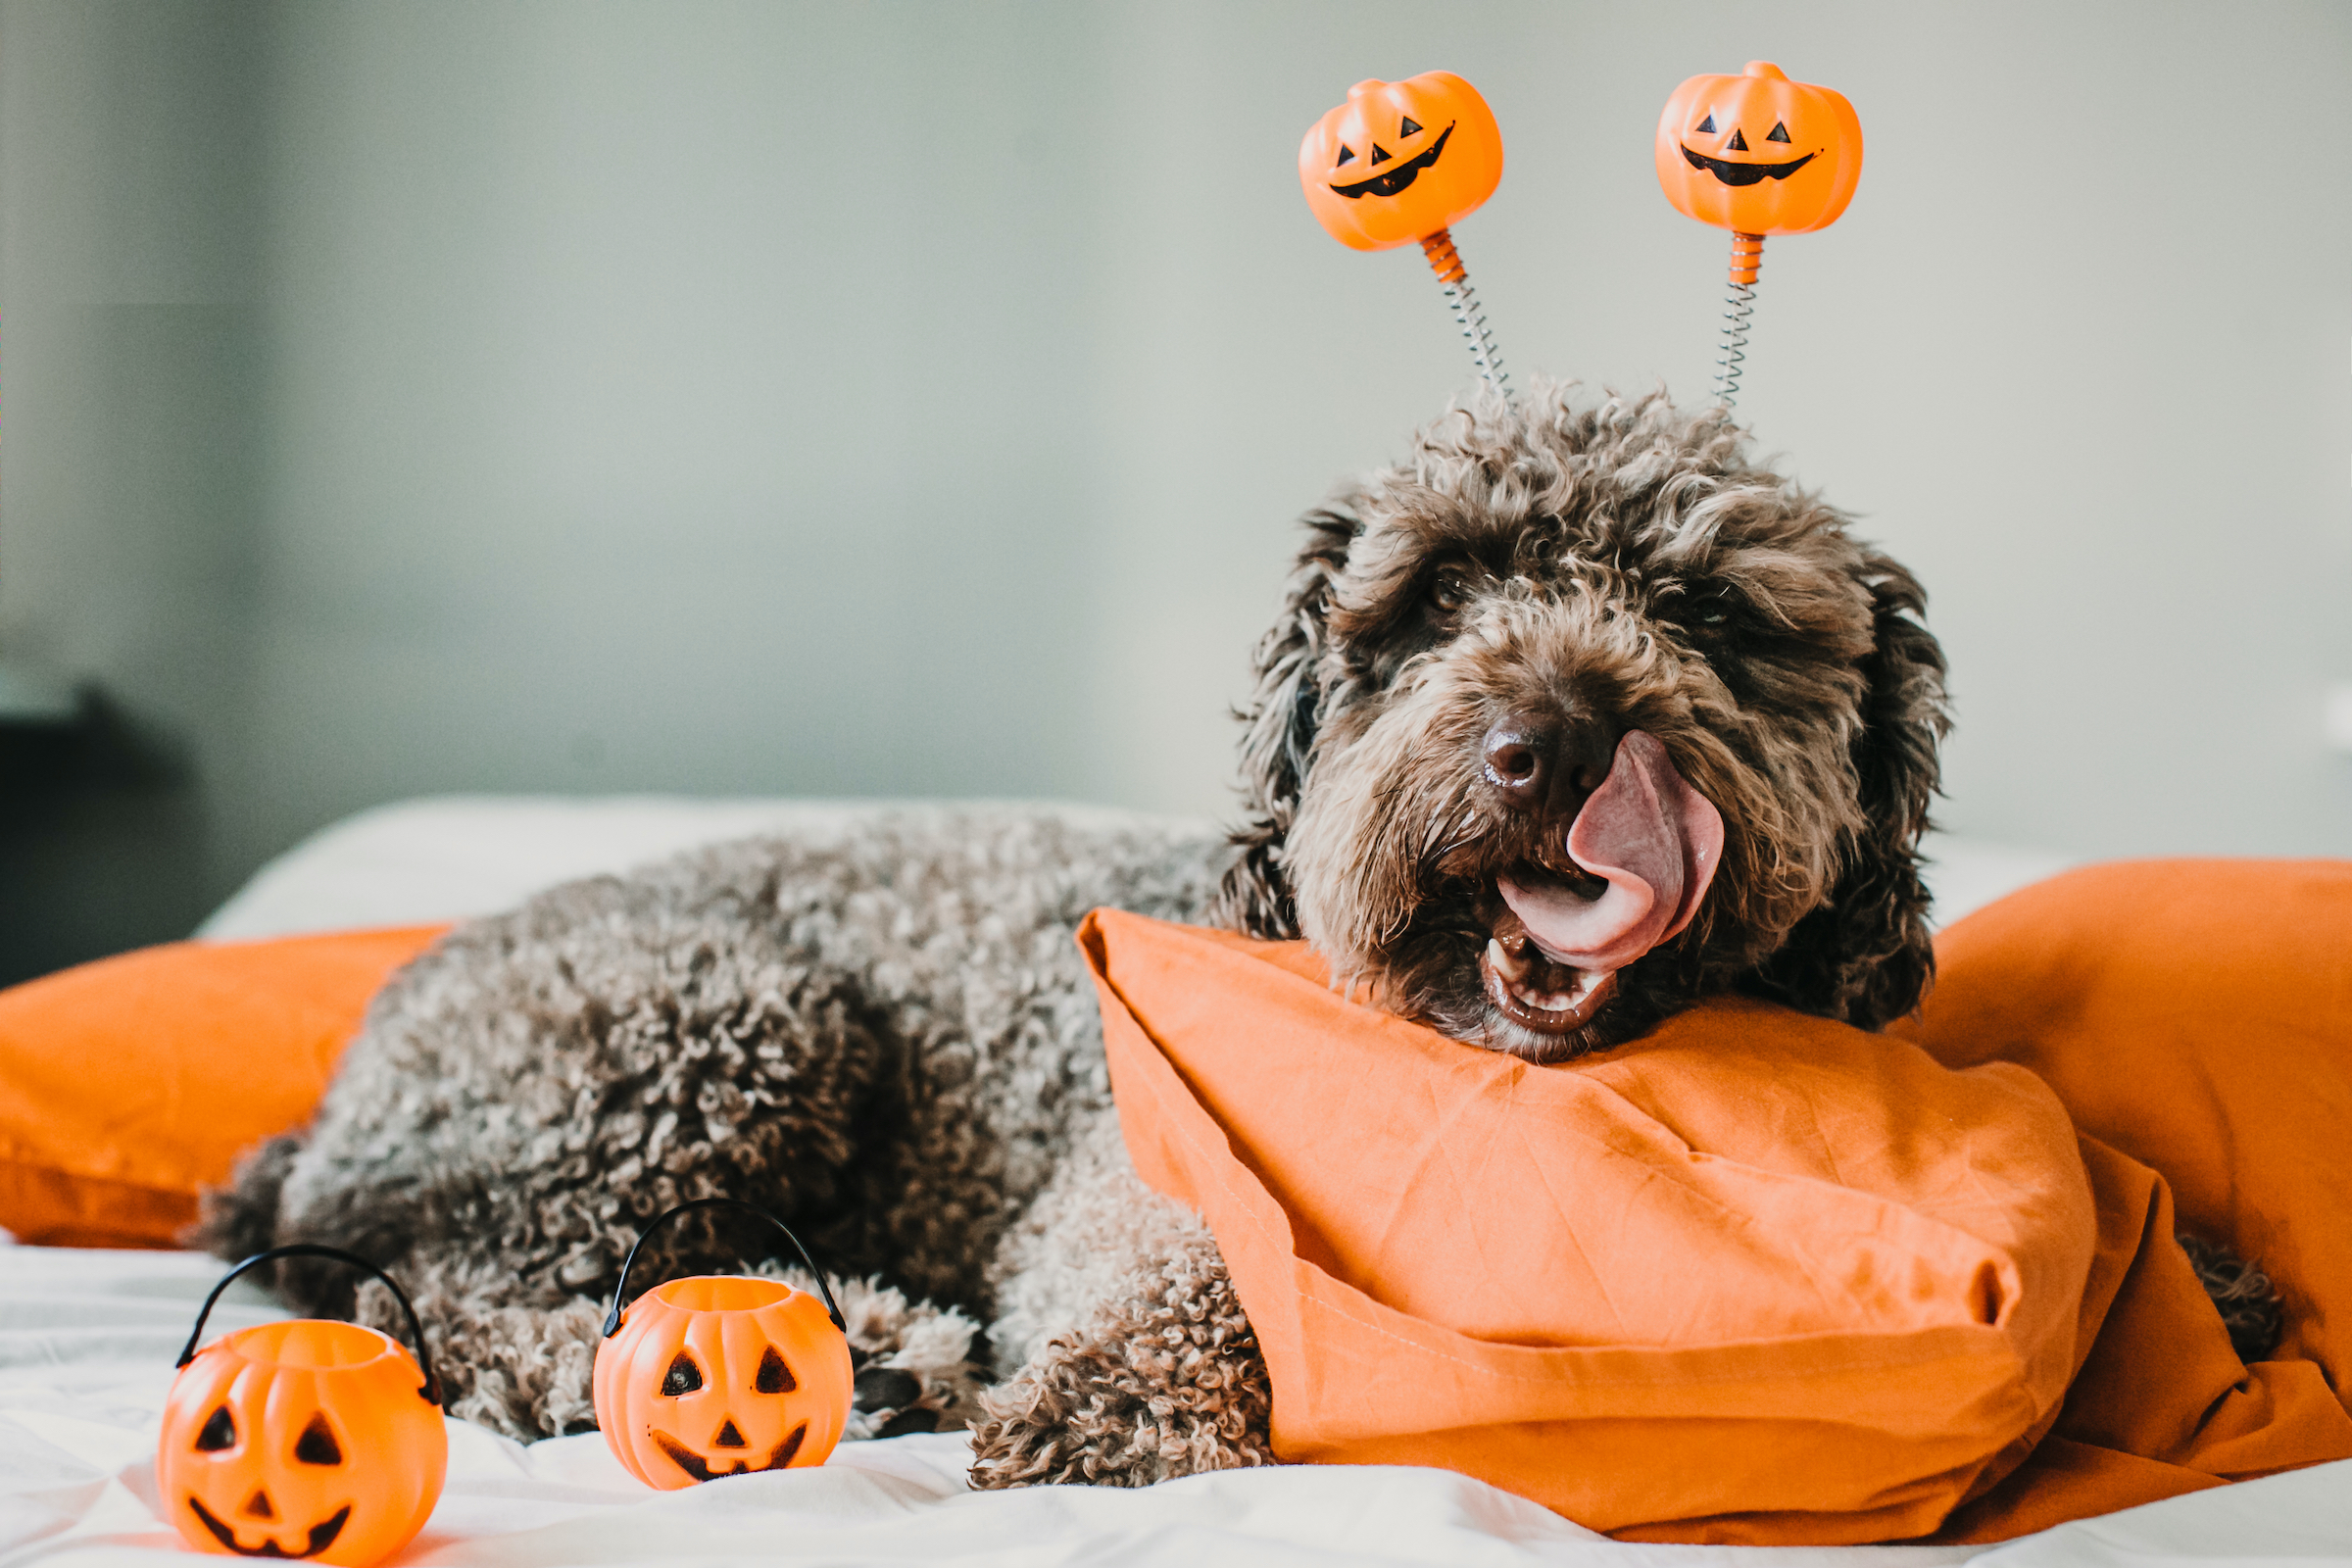 Large Dog Halloween Costume That Are Easy to Make or Buy